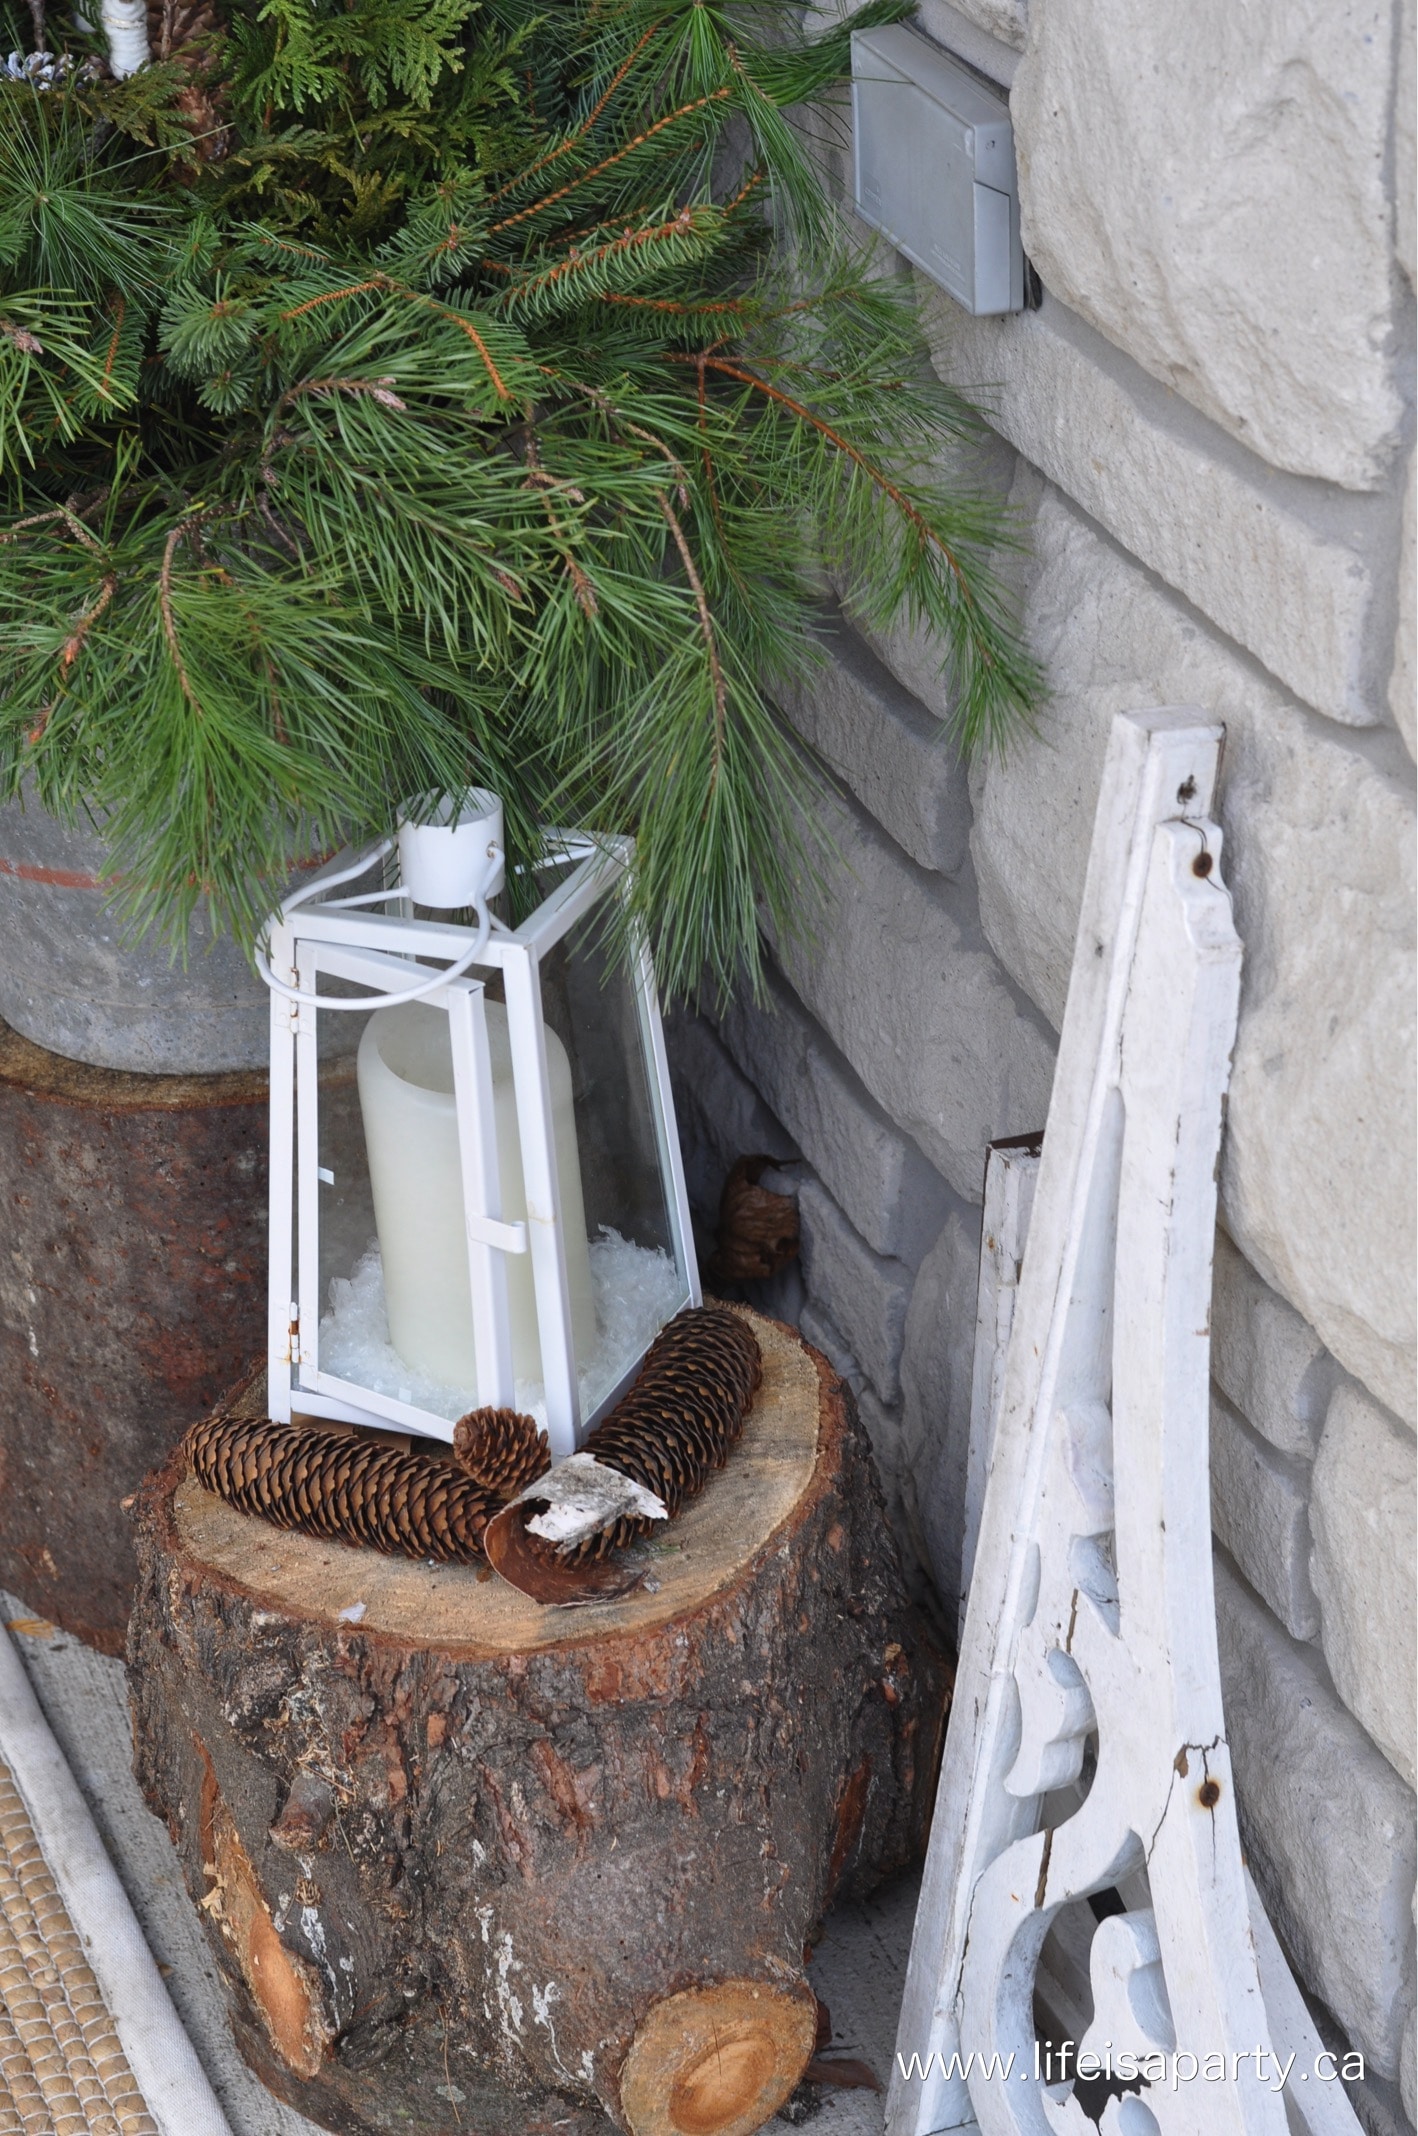 Outdoor Christmas Decorating Ideas for the Front Porch